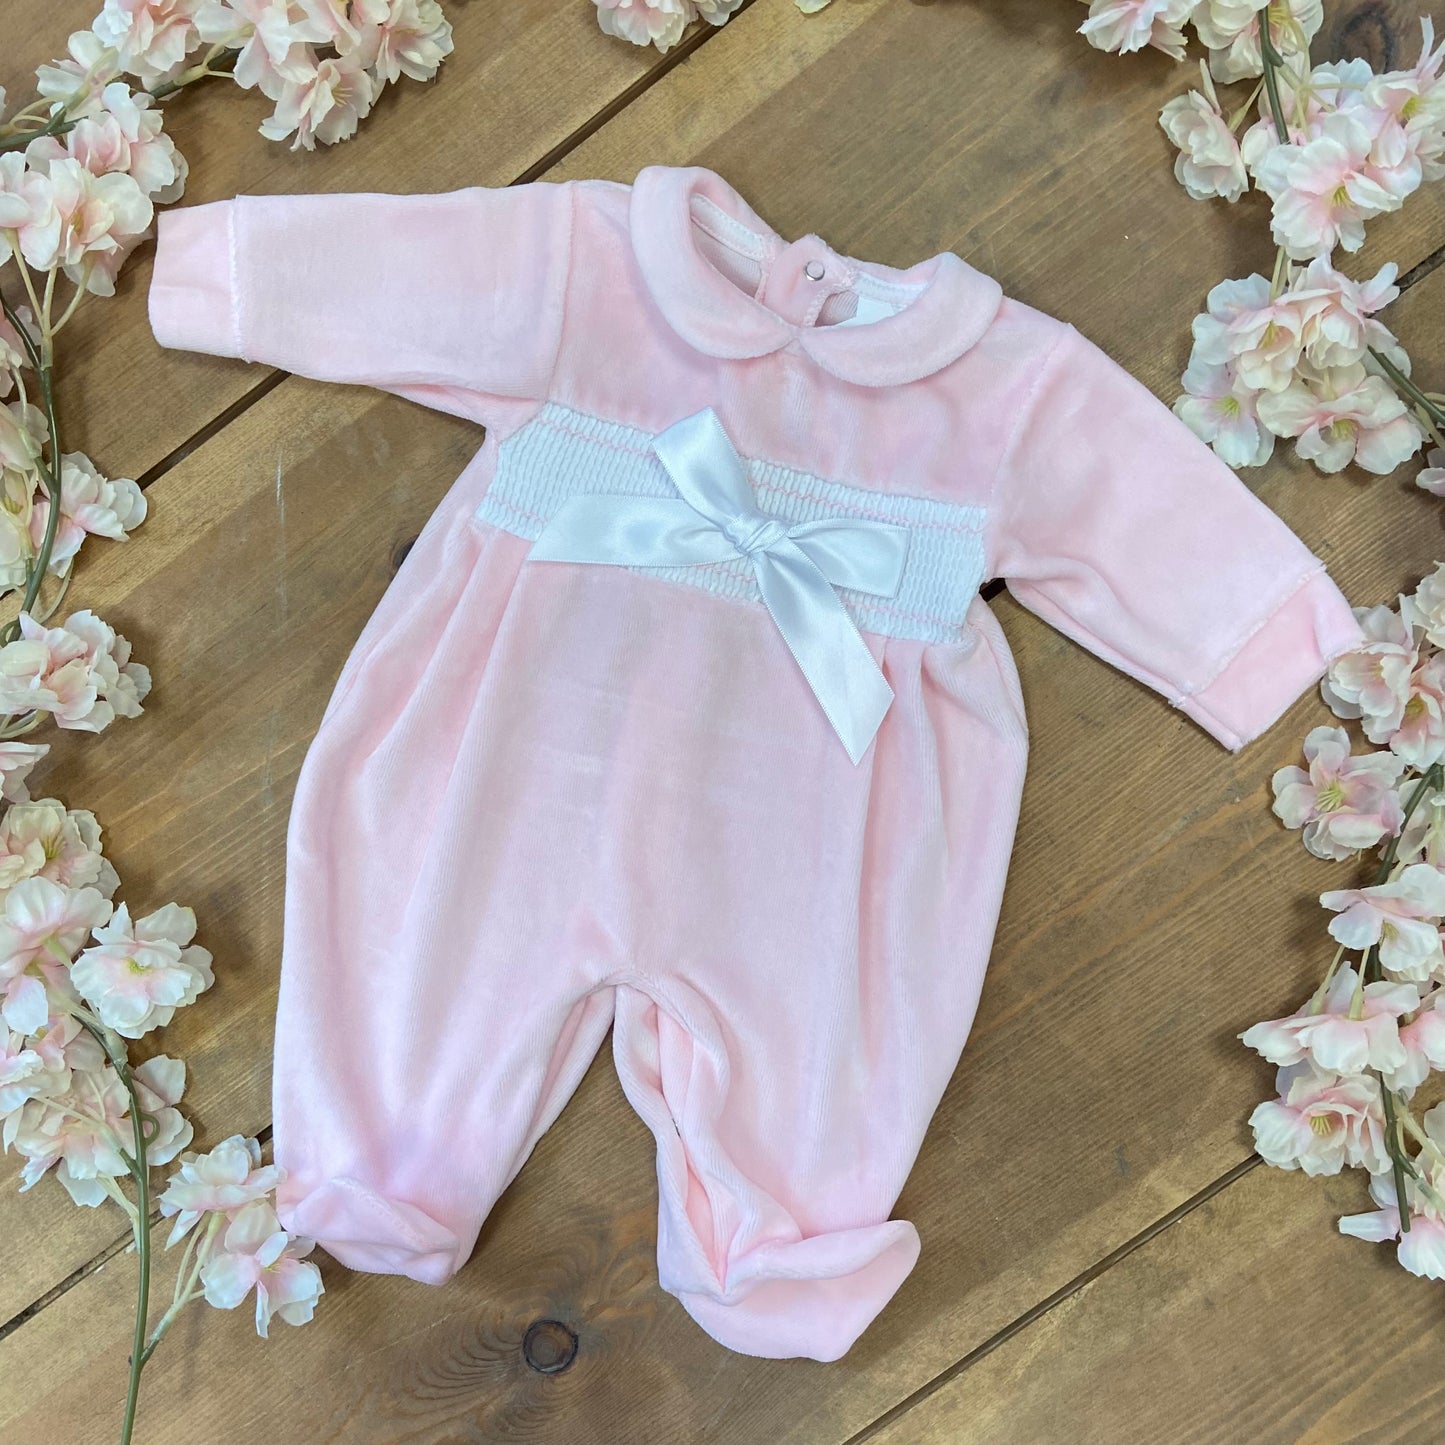 Pink Velour All In One Outfit With Bow